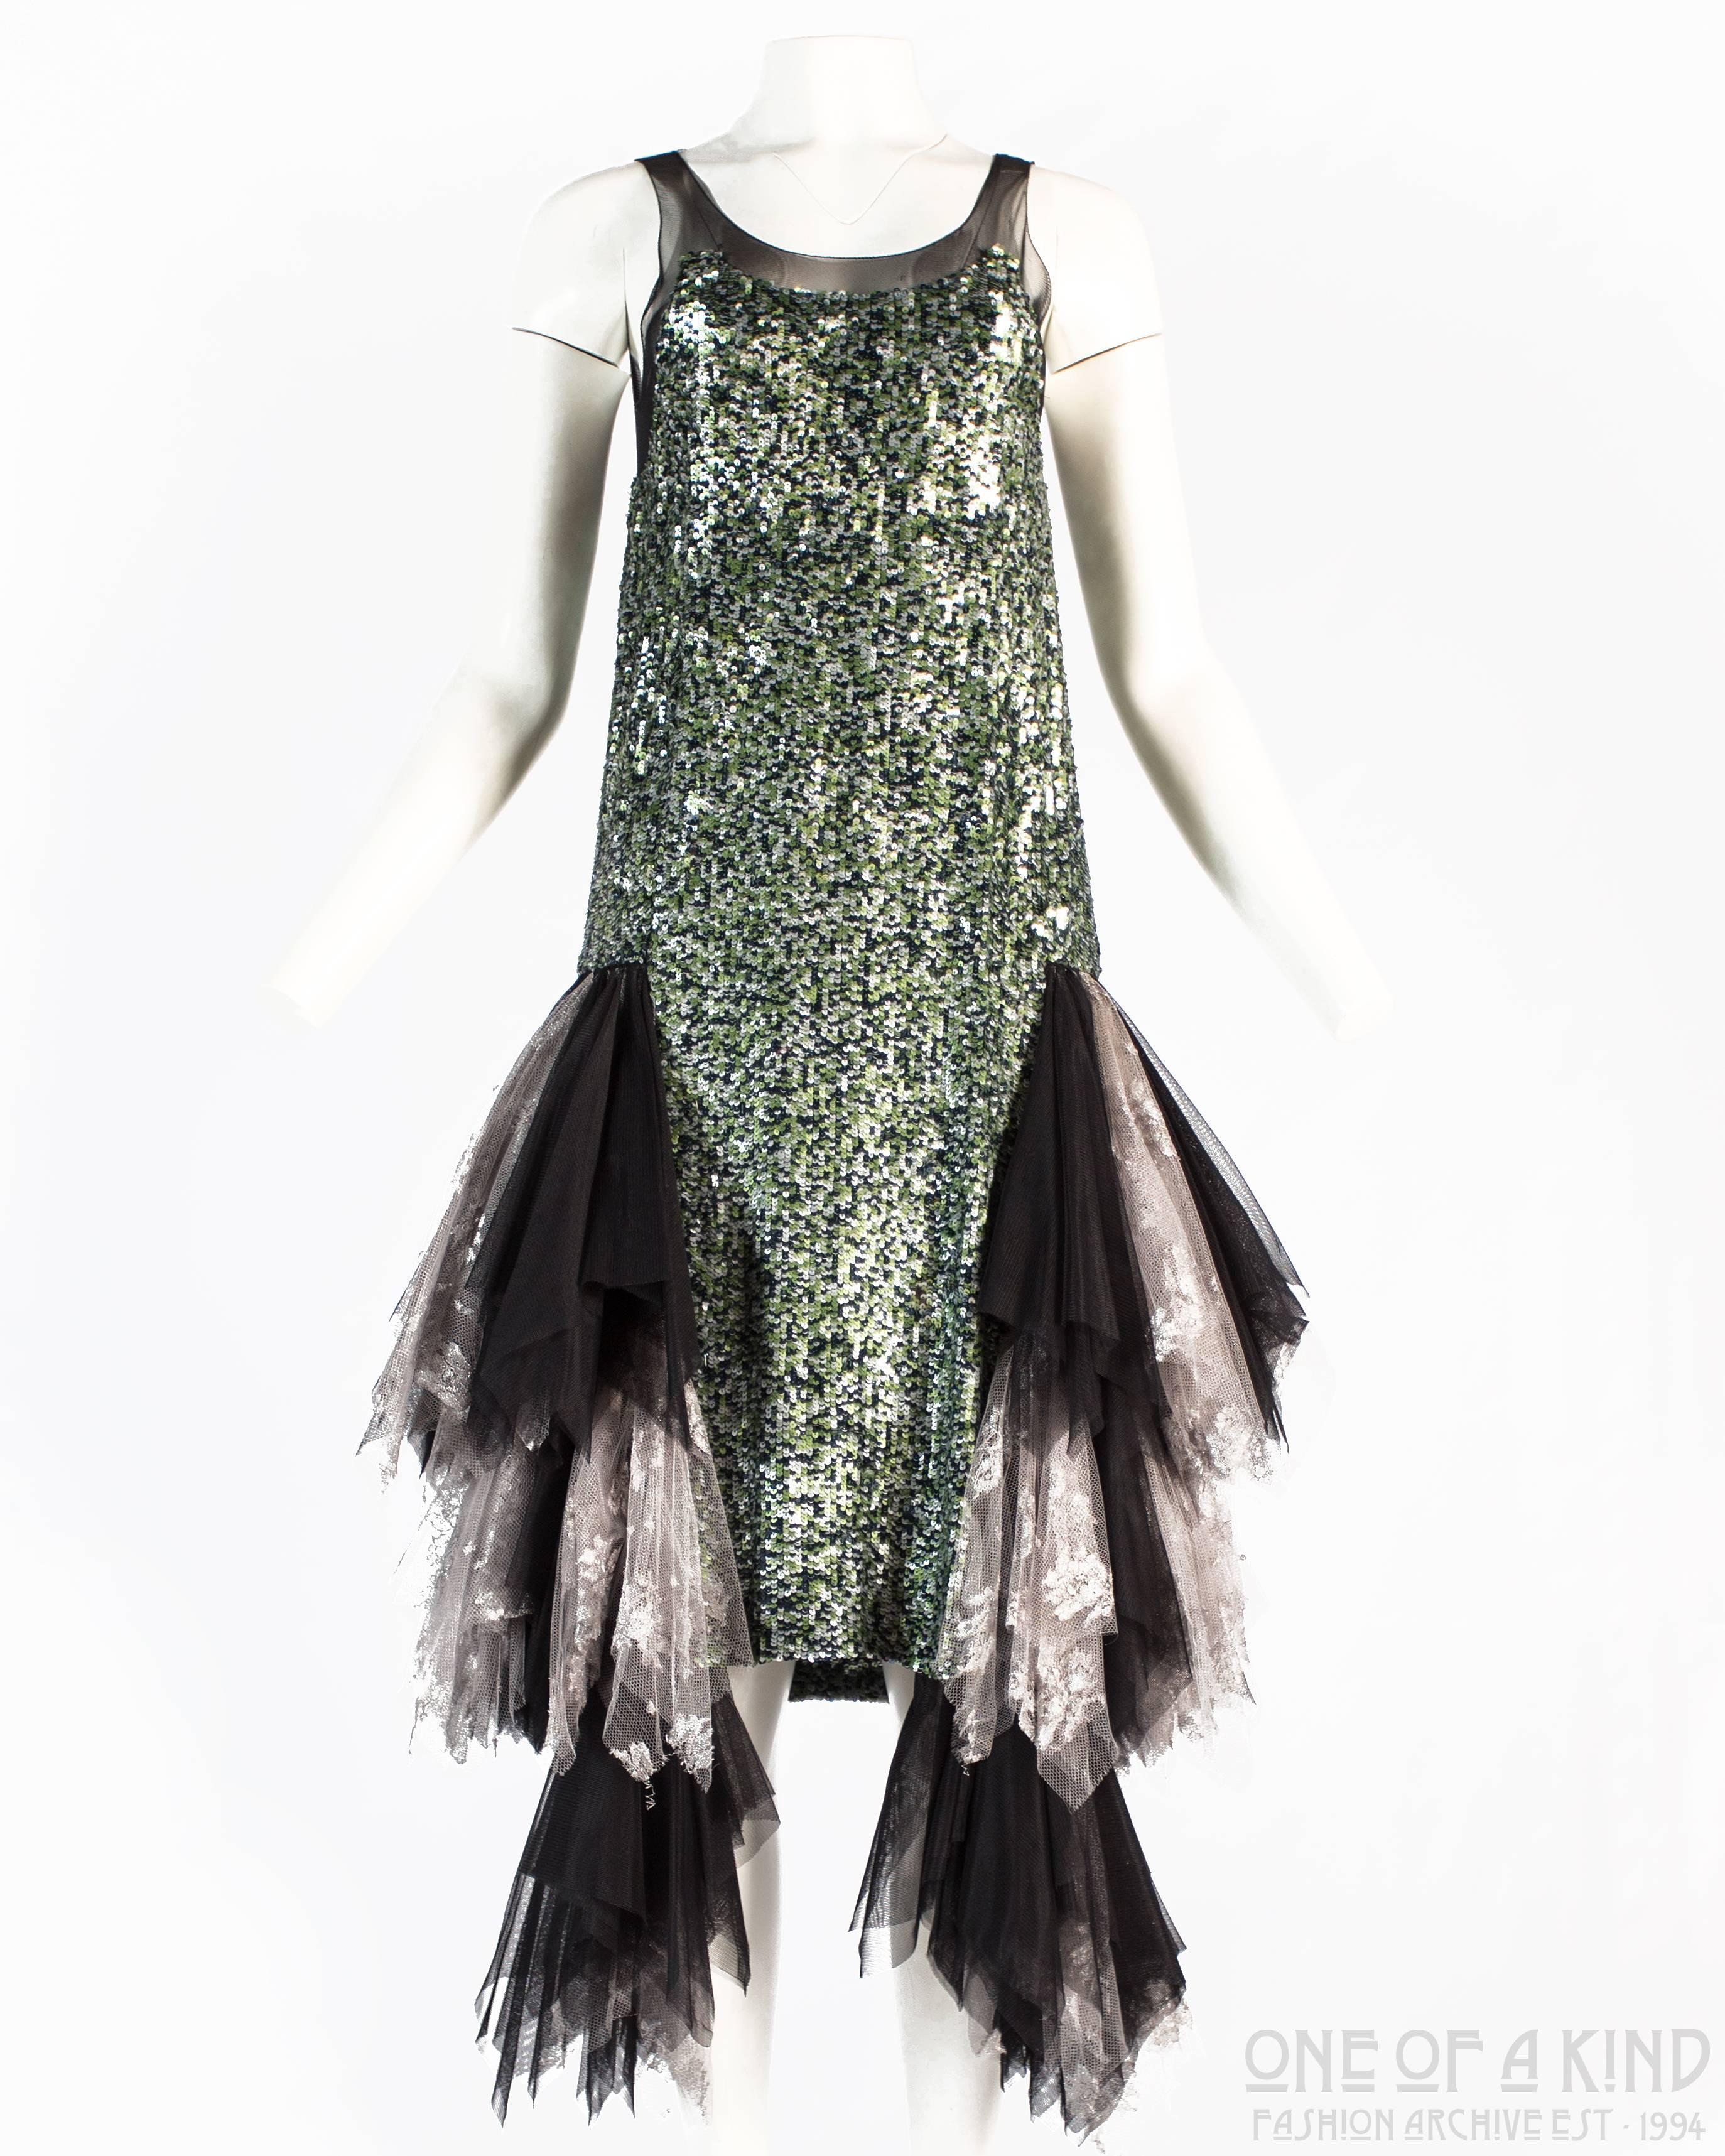 Alexander McQueen tulle, lace and sequin flapper dress

Autumn-Winter 2001